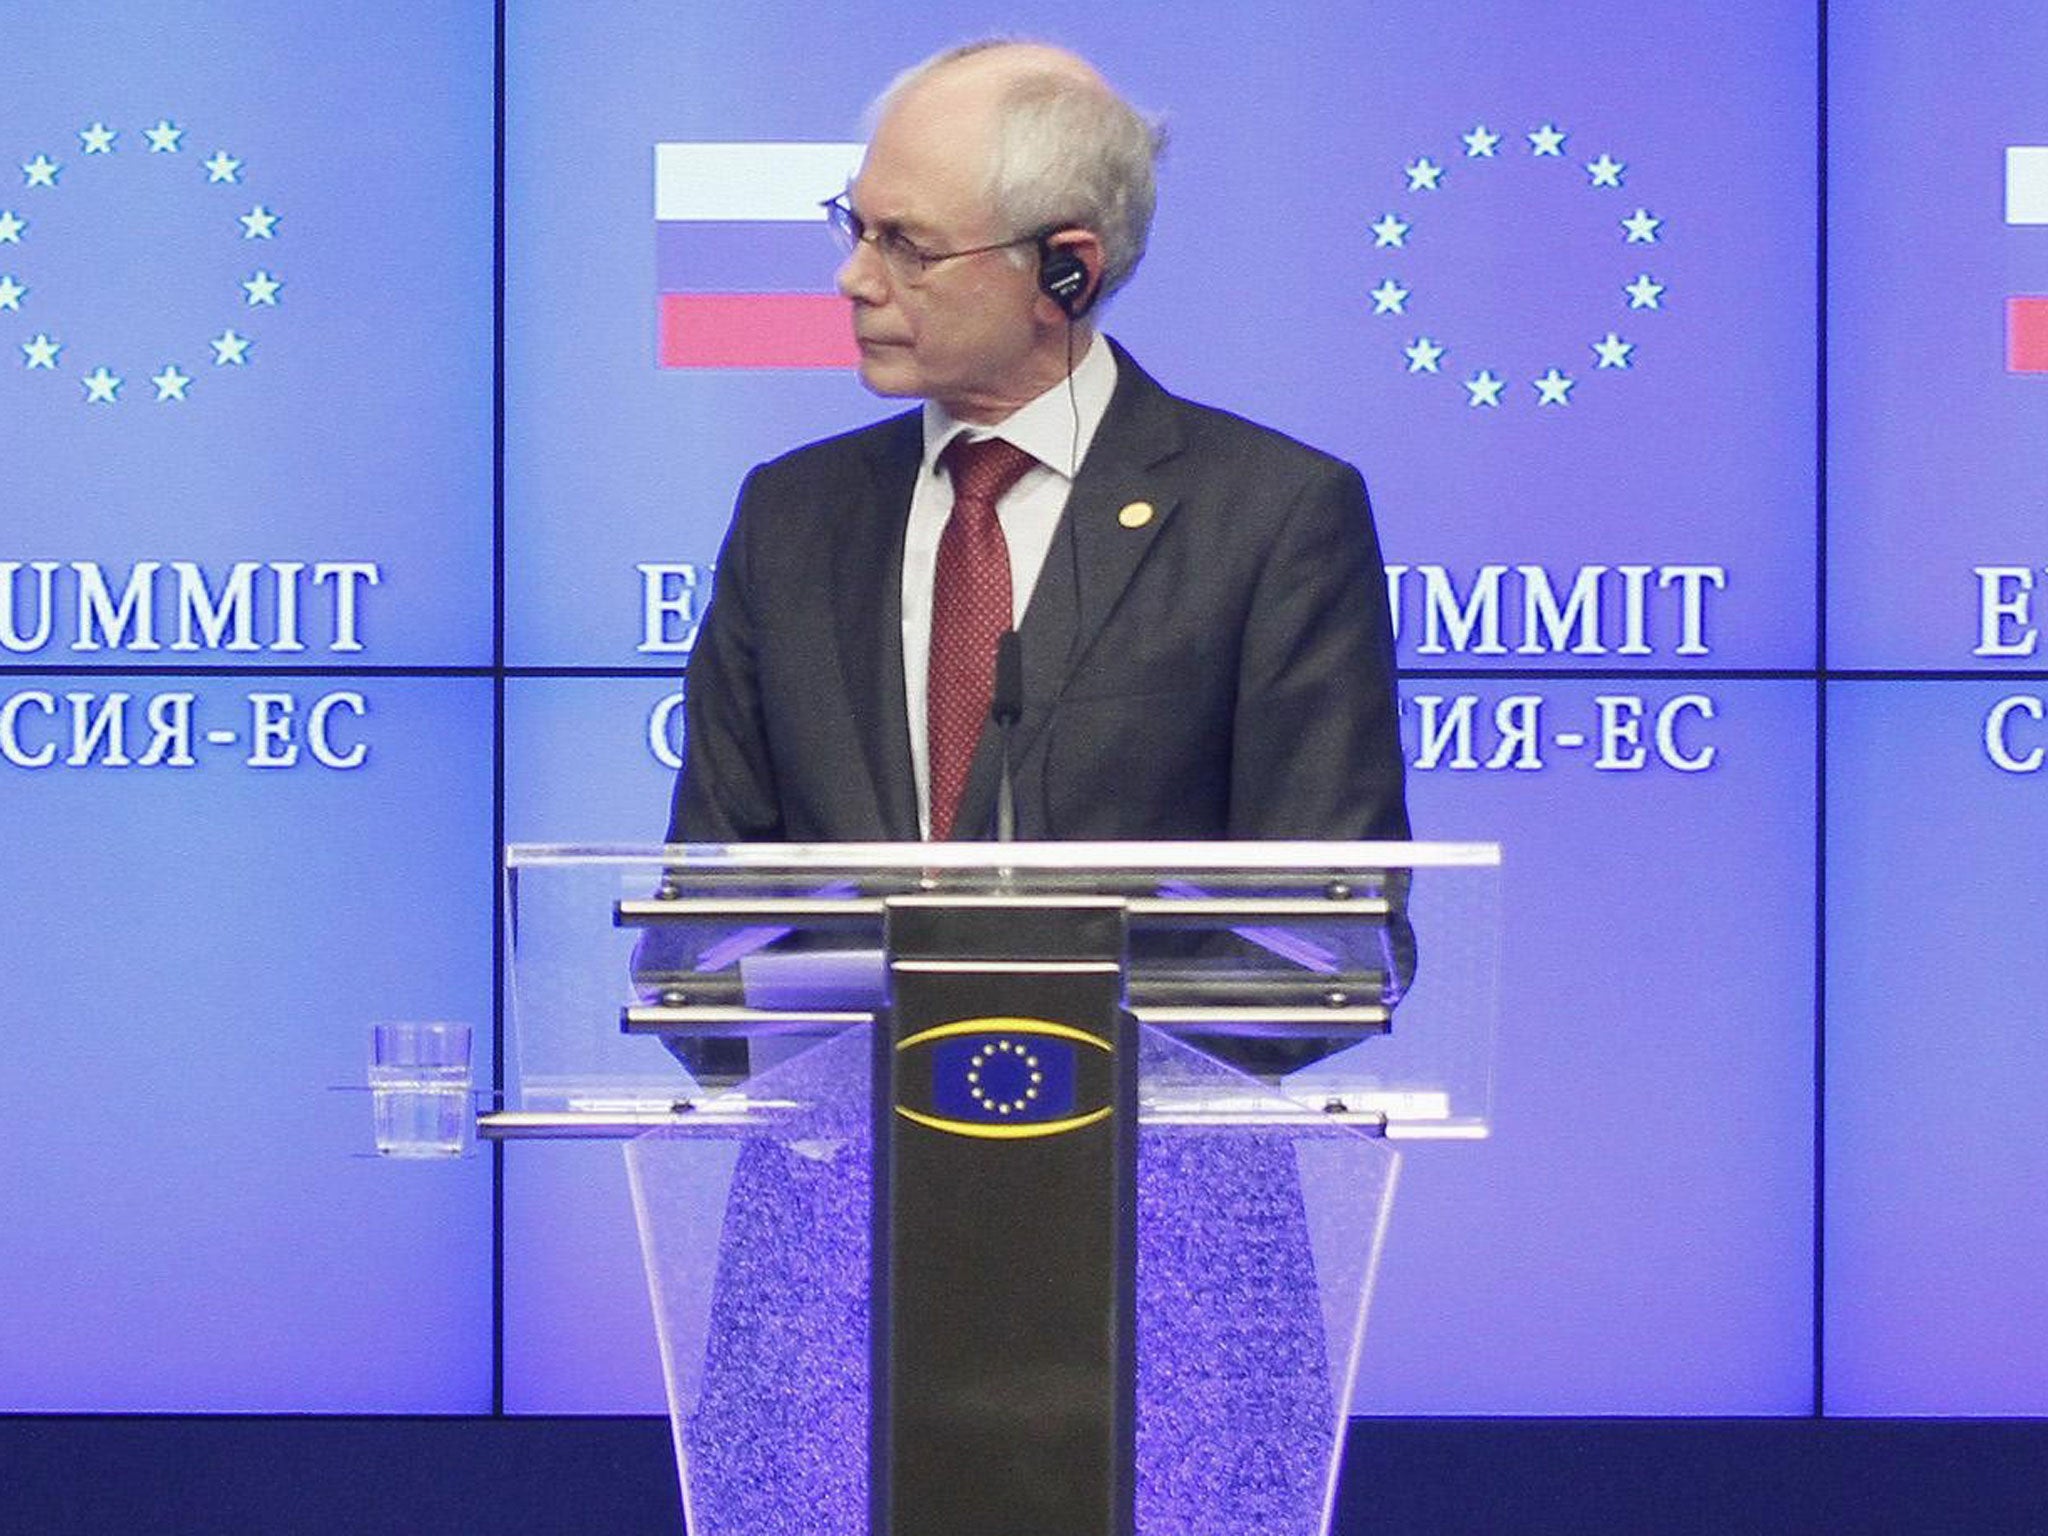 European Union president Herman Van Rompuy said the UK's exit from the union would see a 'friend walk off into the desert'